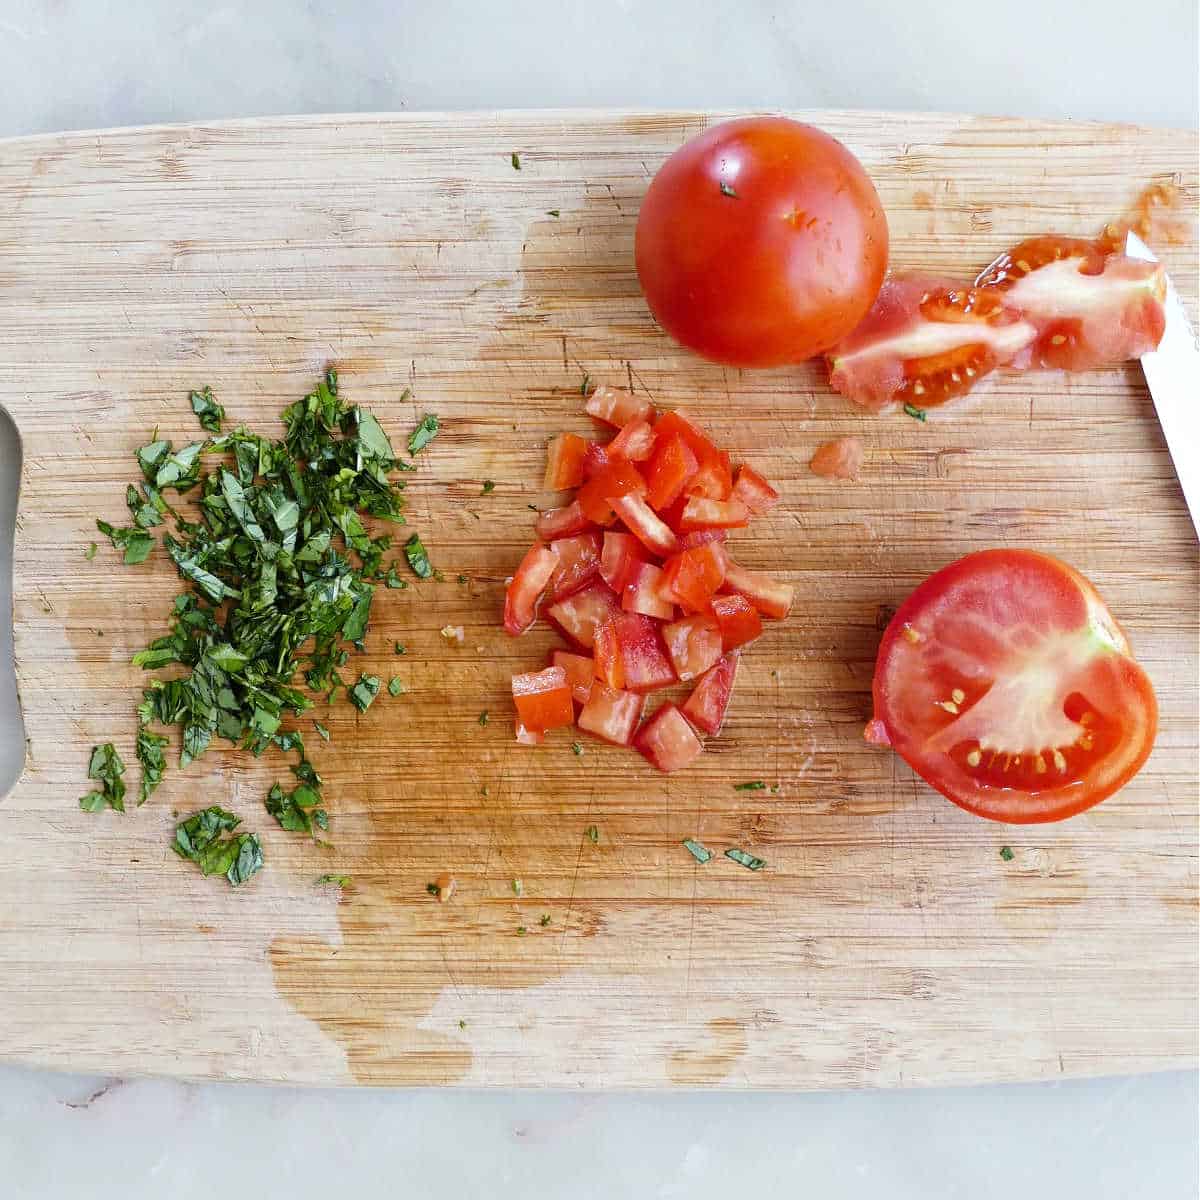 chopped basil and tomatoes on a cutting board next to a knife